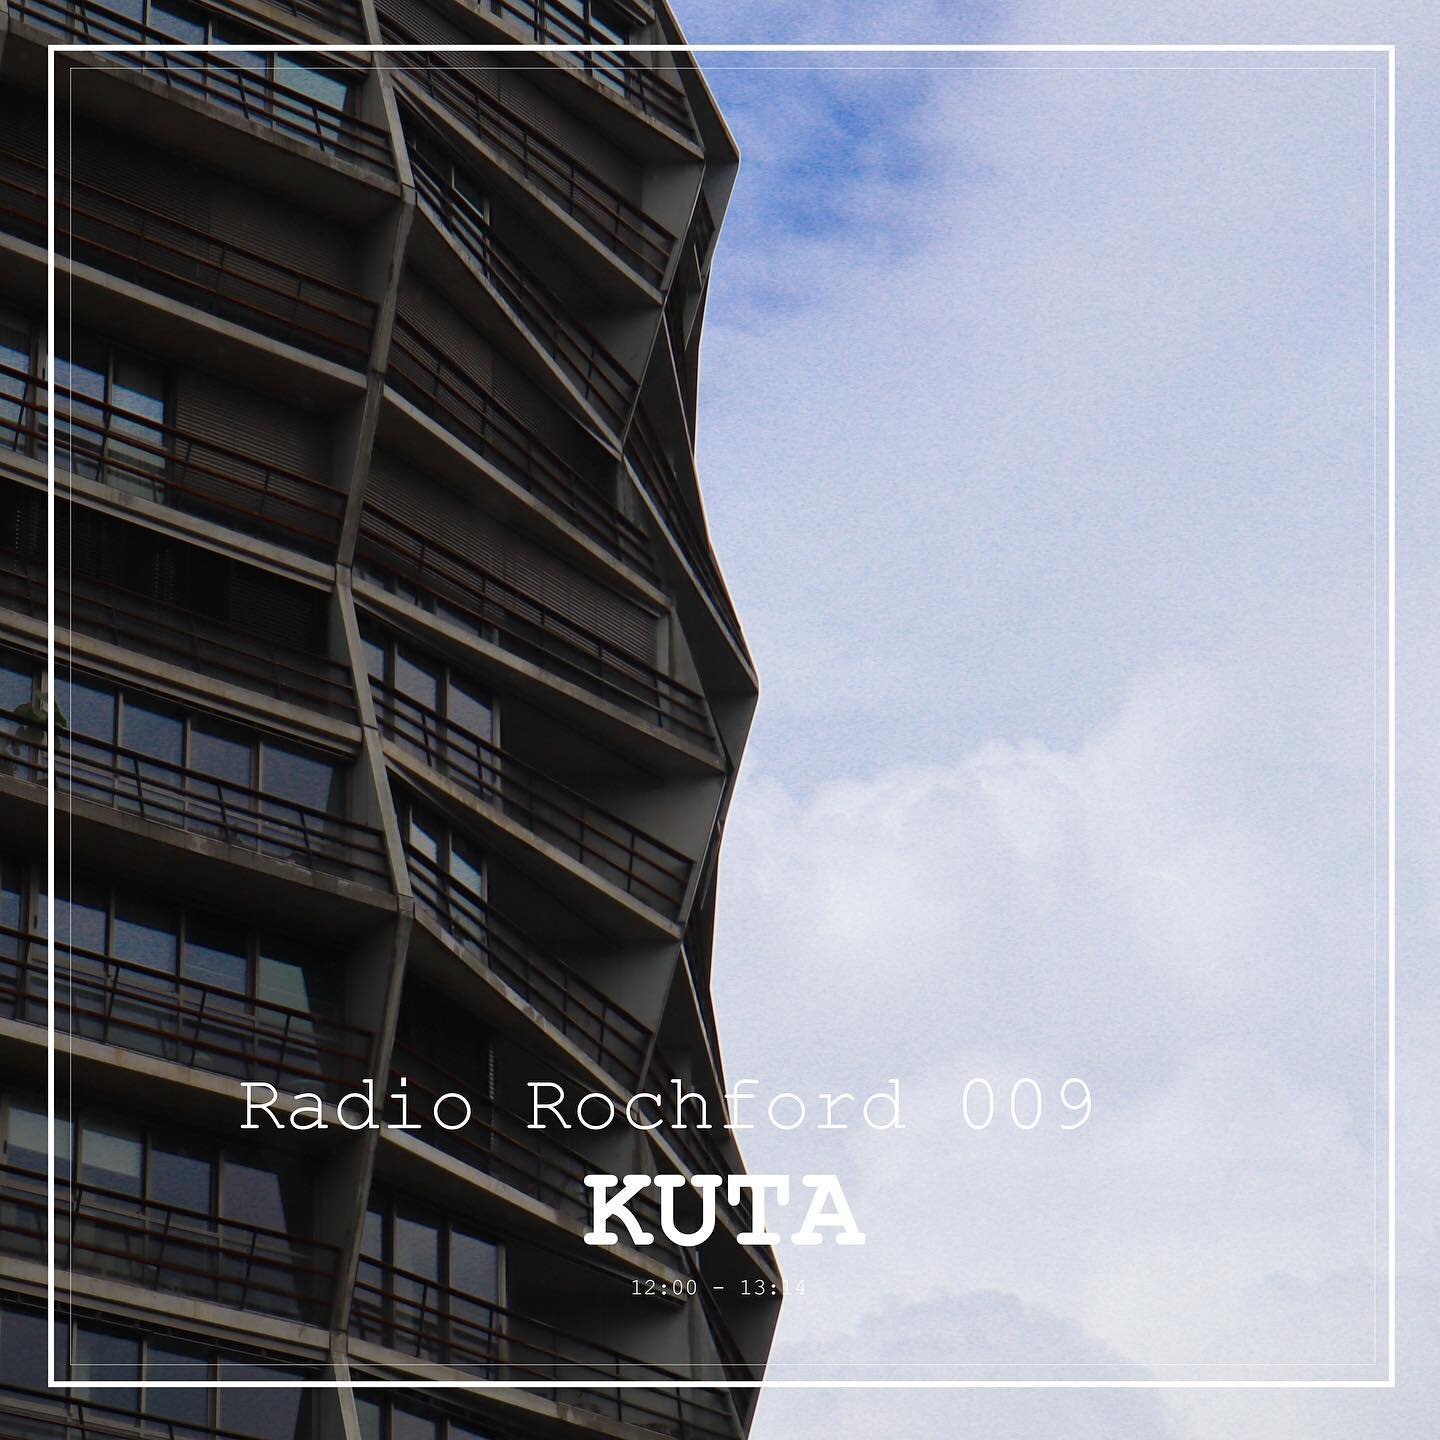 Rochford's own waiter extraordinaire + local digger Tony Pepperoni aka Kuta curates the latest mix for RR with a nice little bunch of downtempo dub, street soul and Bristol vibes for the rainy days ahead of us. Amazing selection brother, thank you!

